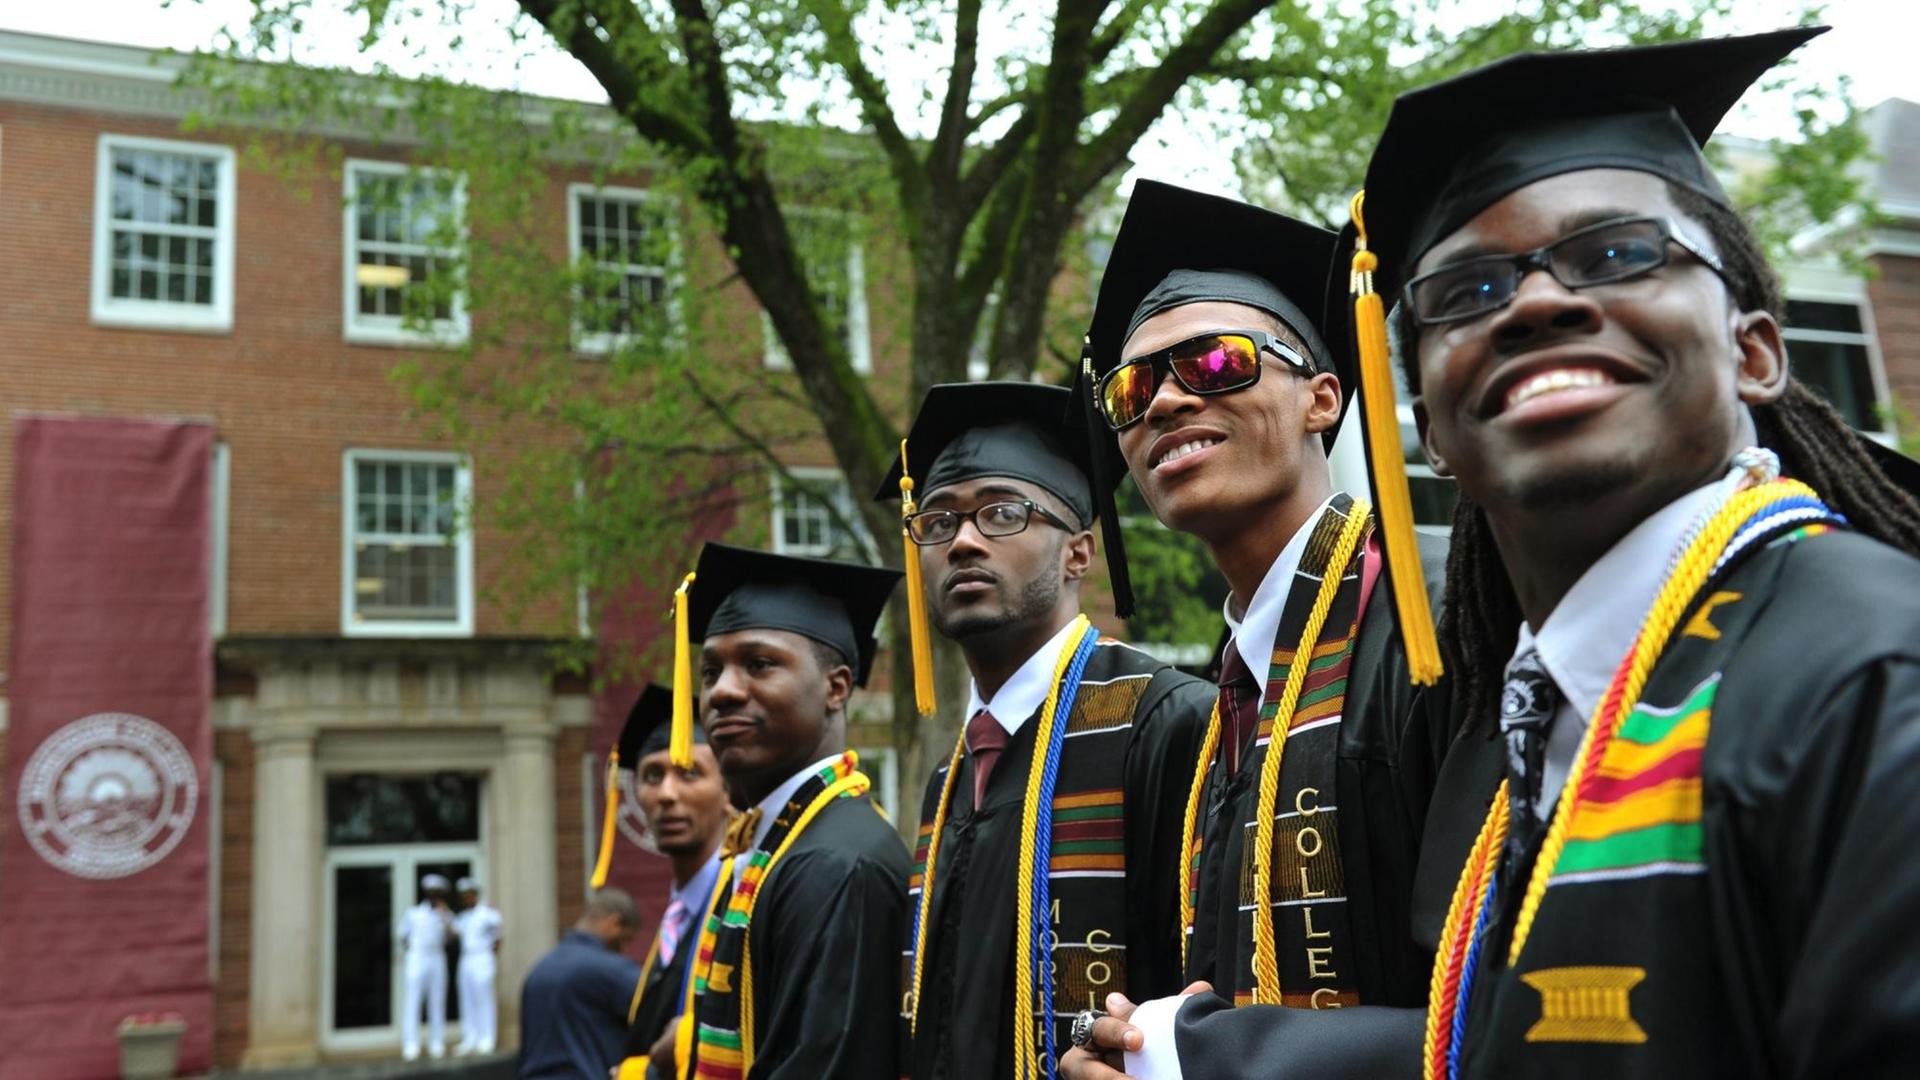 Members of the graduation class of 2013 stand during the commencement ceremony before US President Barack Obama delivers the key address at Morehouse College on May 19, 2013 in Atlanta, Georgia. AFP PHOTO/Mandel NGAN / AFP PHOTO / MANDEL NGAN